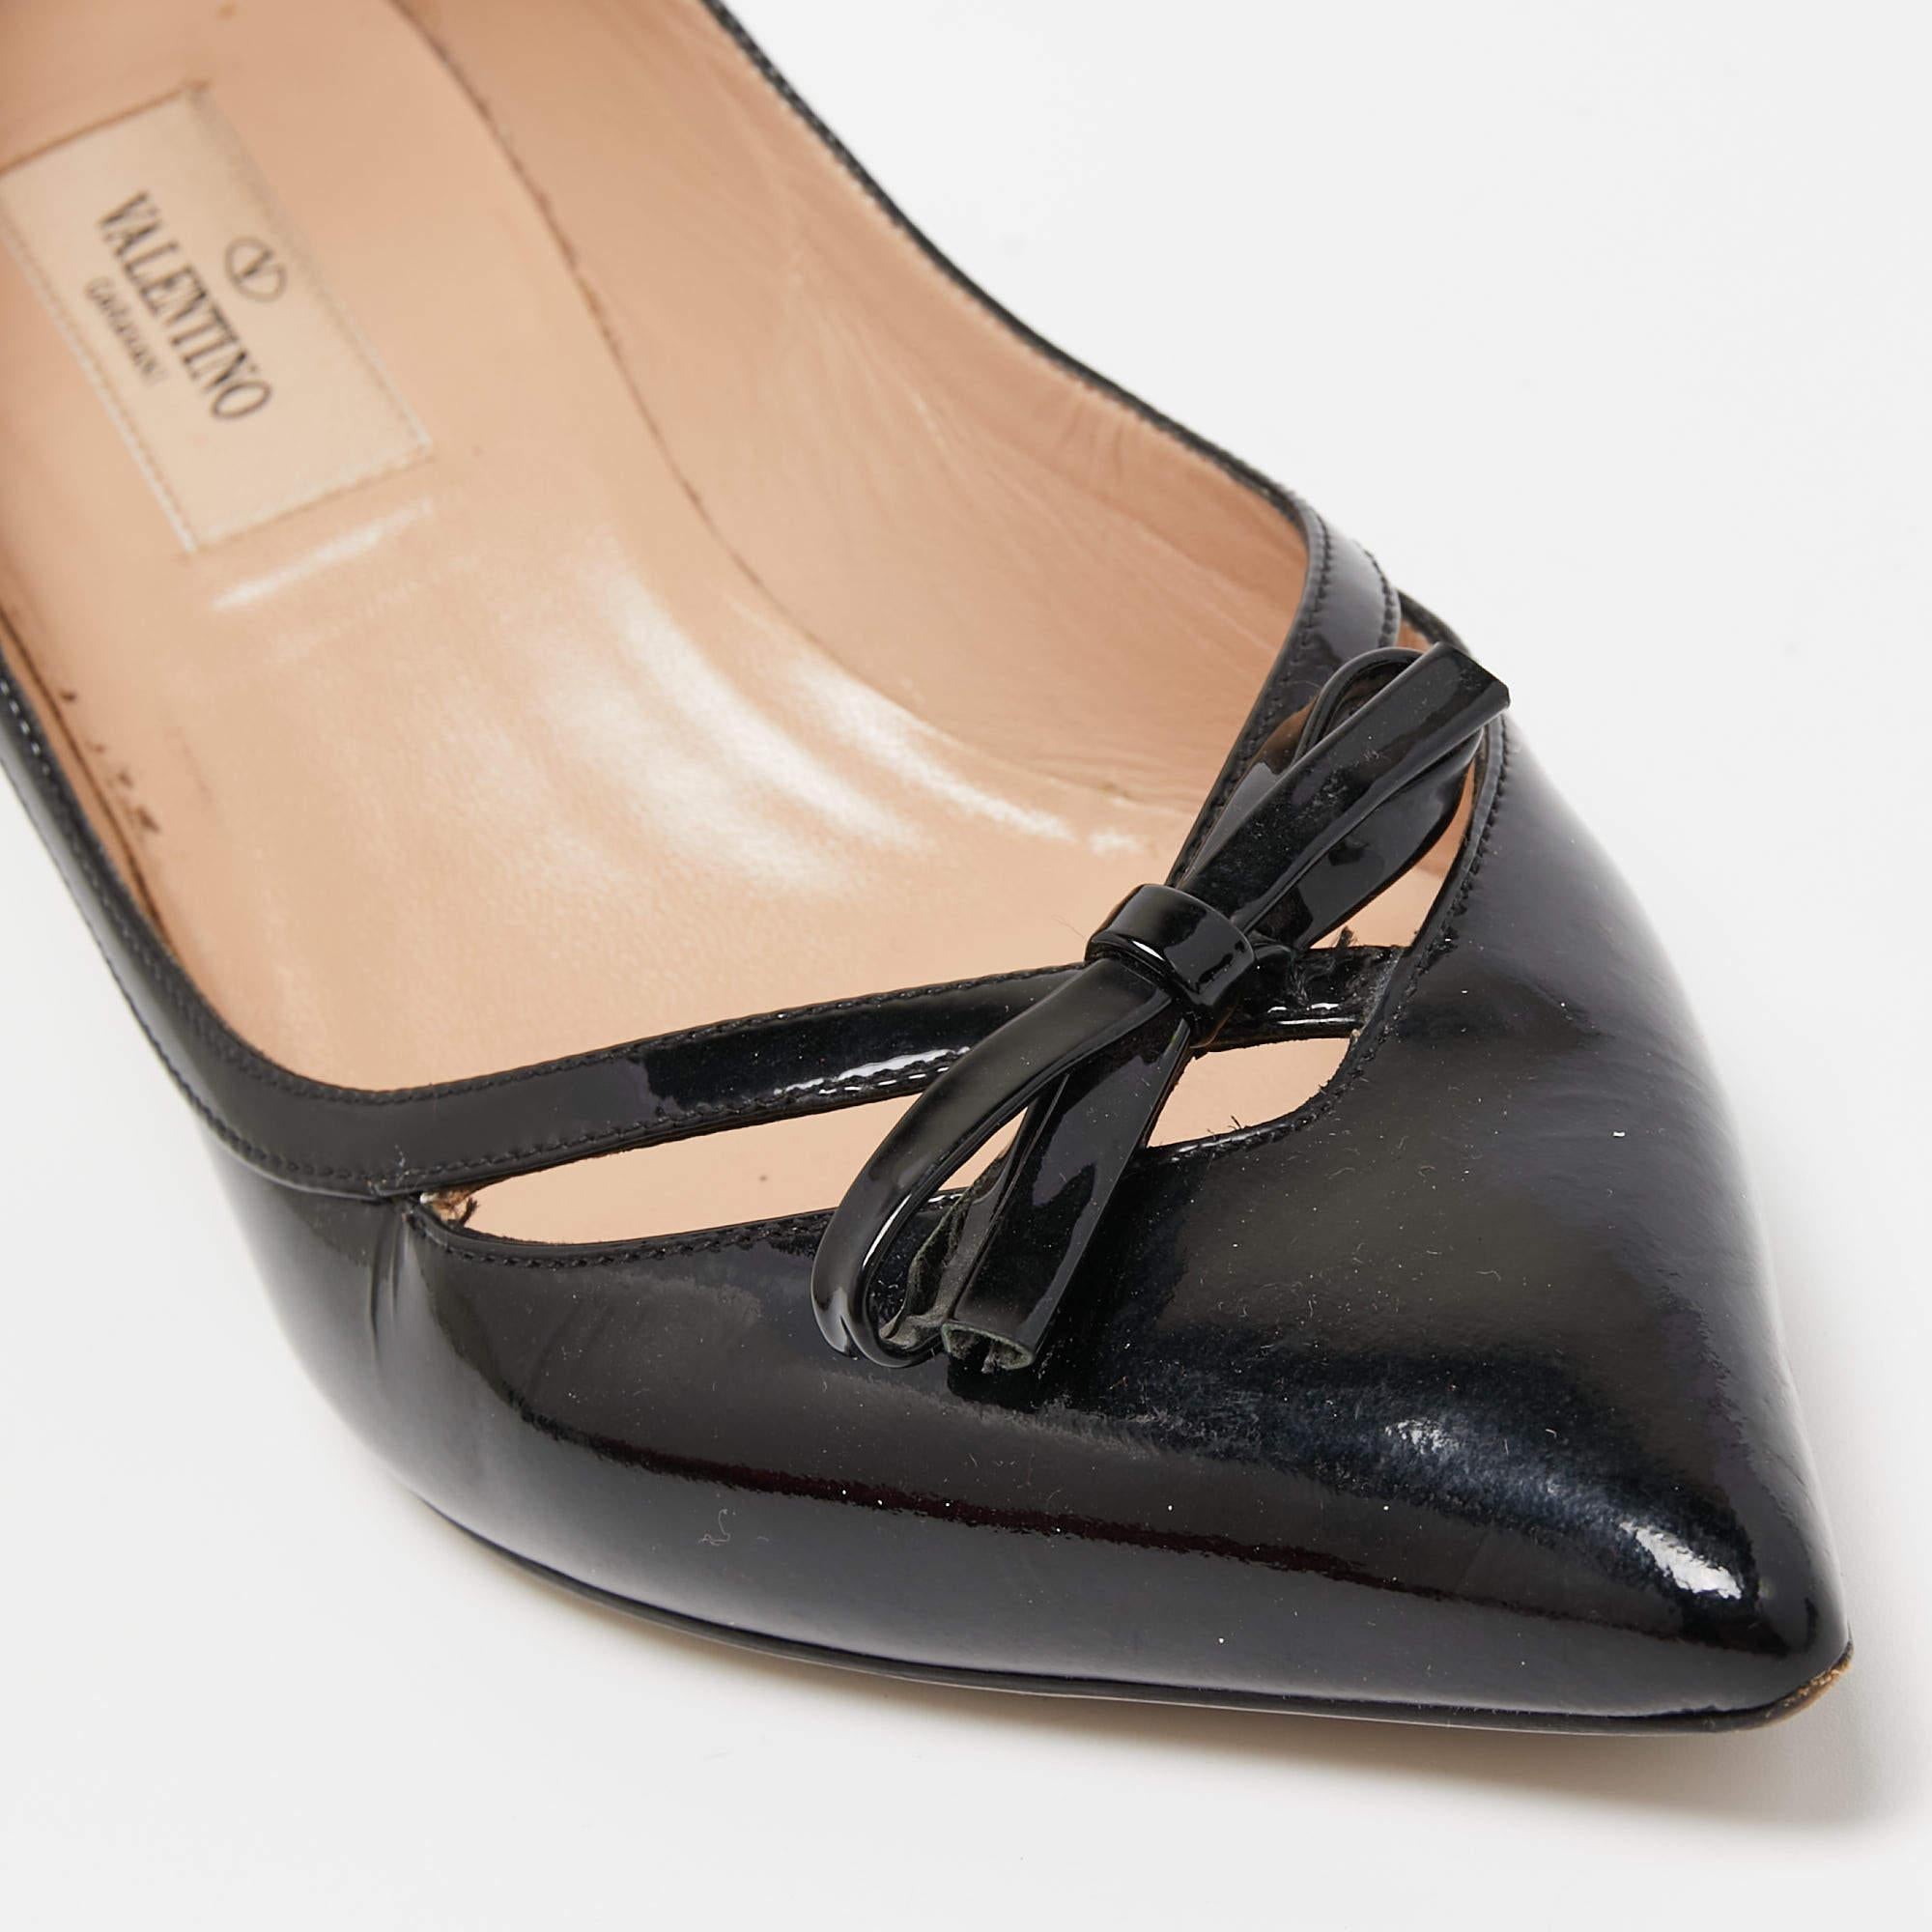 Valentino Black Patent Leather Bow Pumps Size 36.5 2